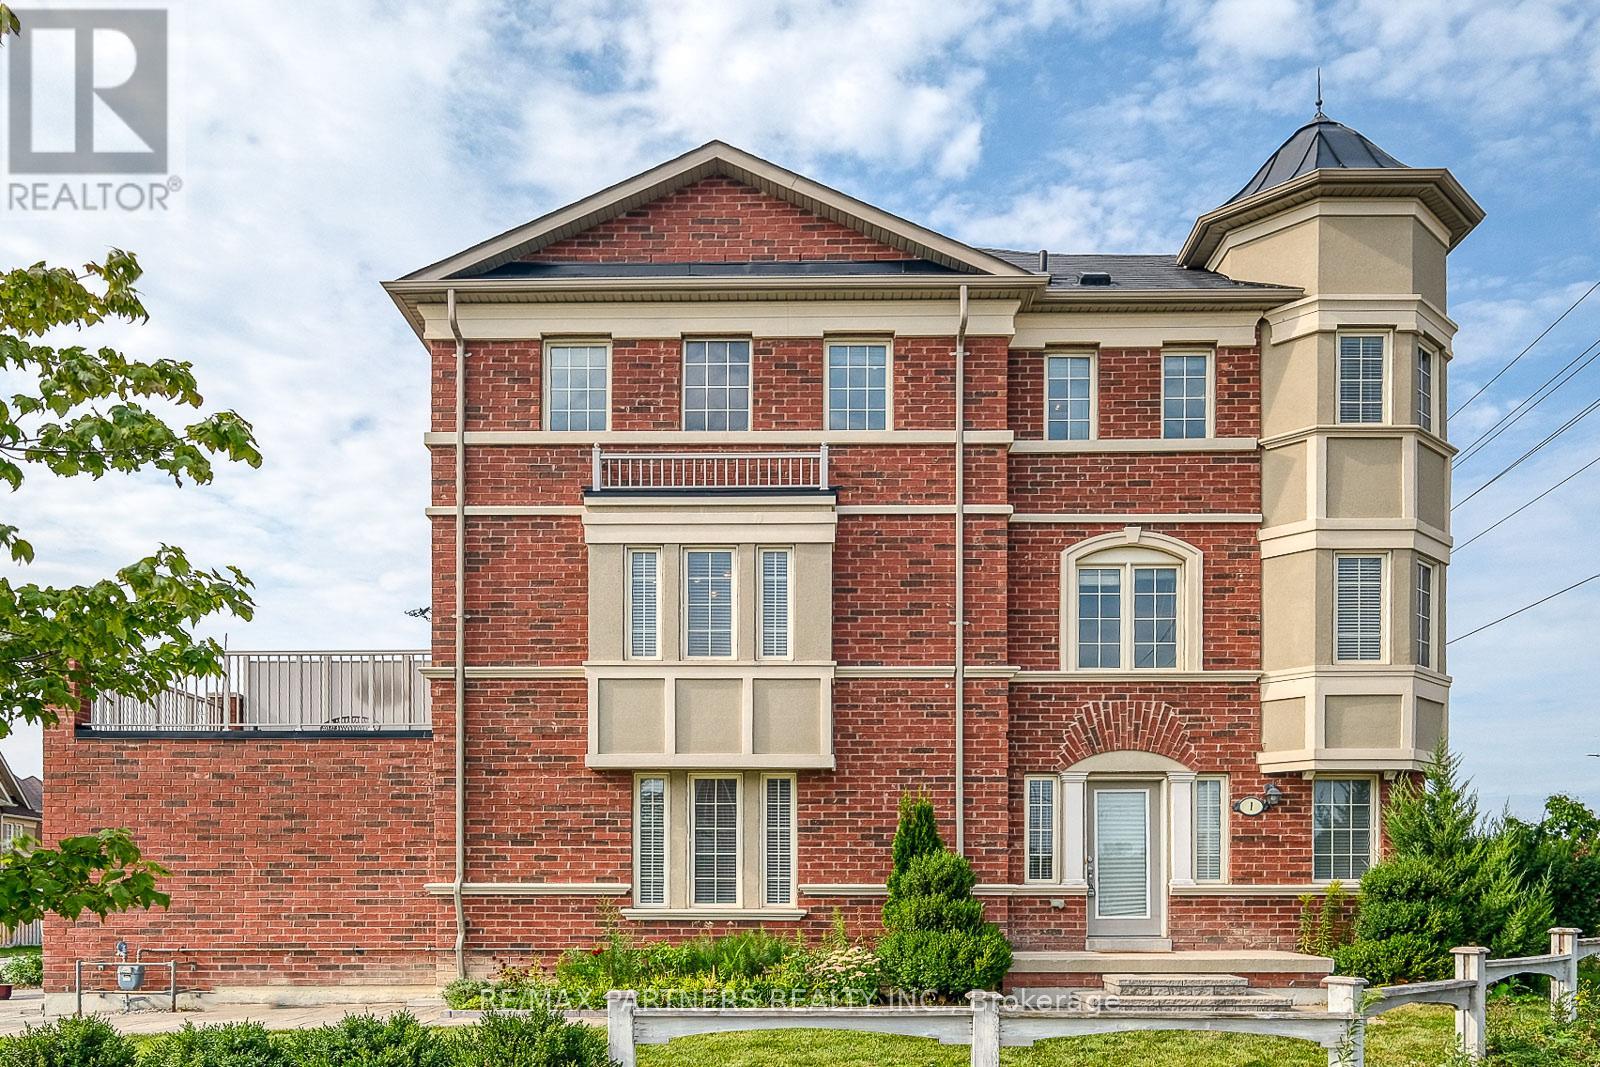 1 PERCY REESOR ST located in Markham, Ontario